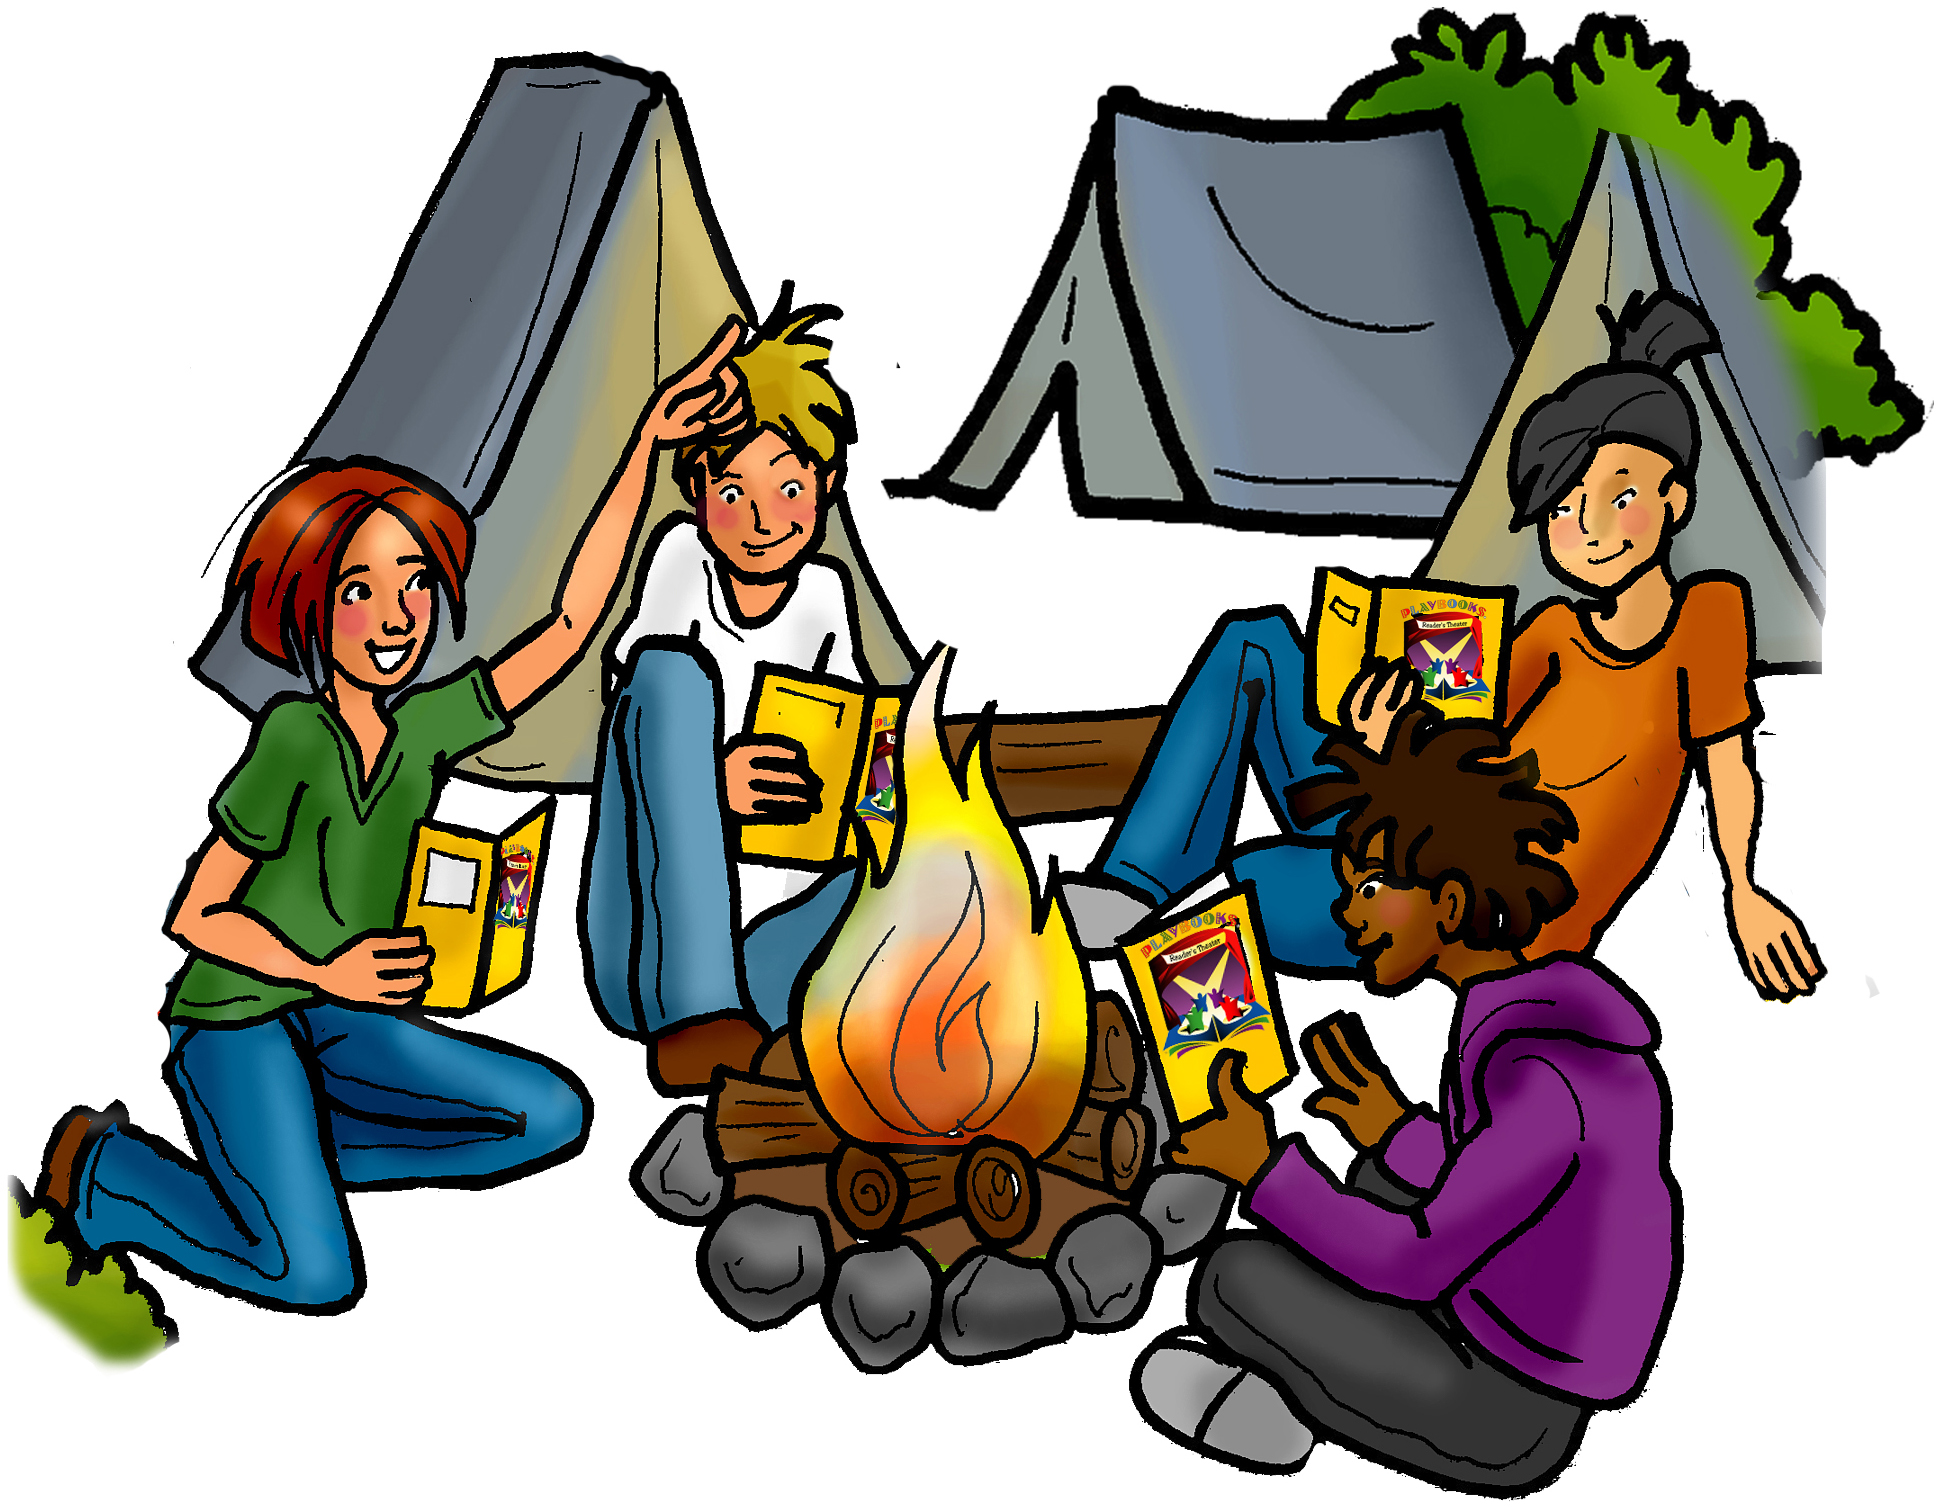 Camping kids summer camp clipart free clipart images 3 - Cliparting.com.